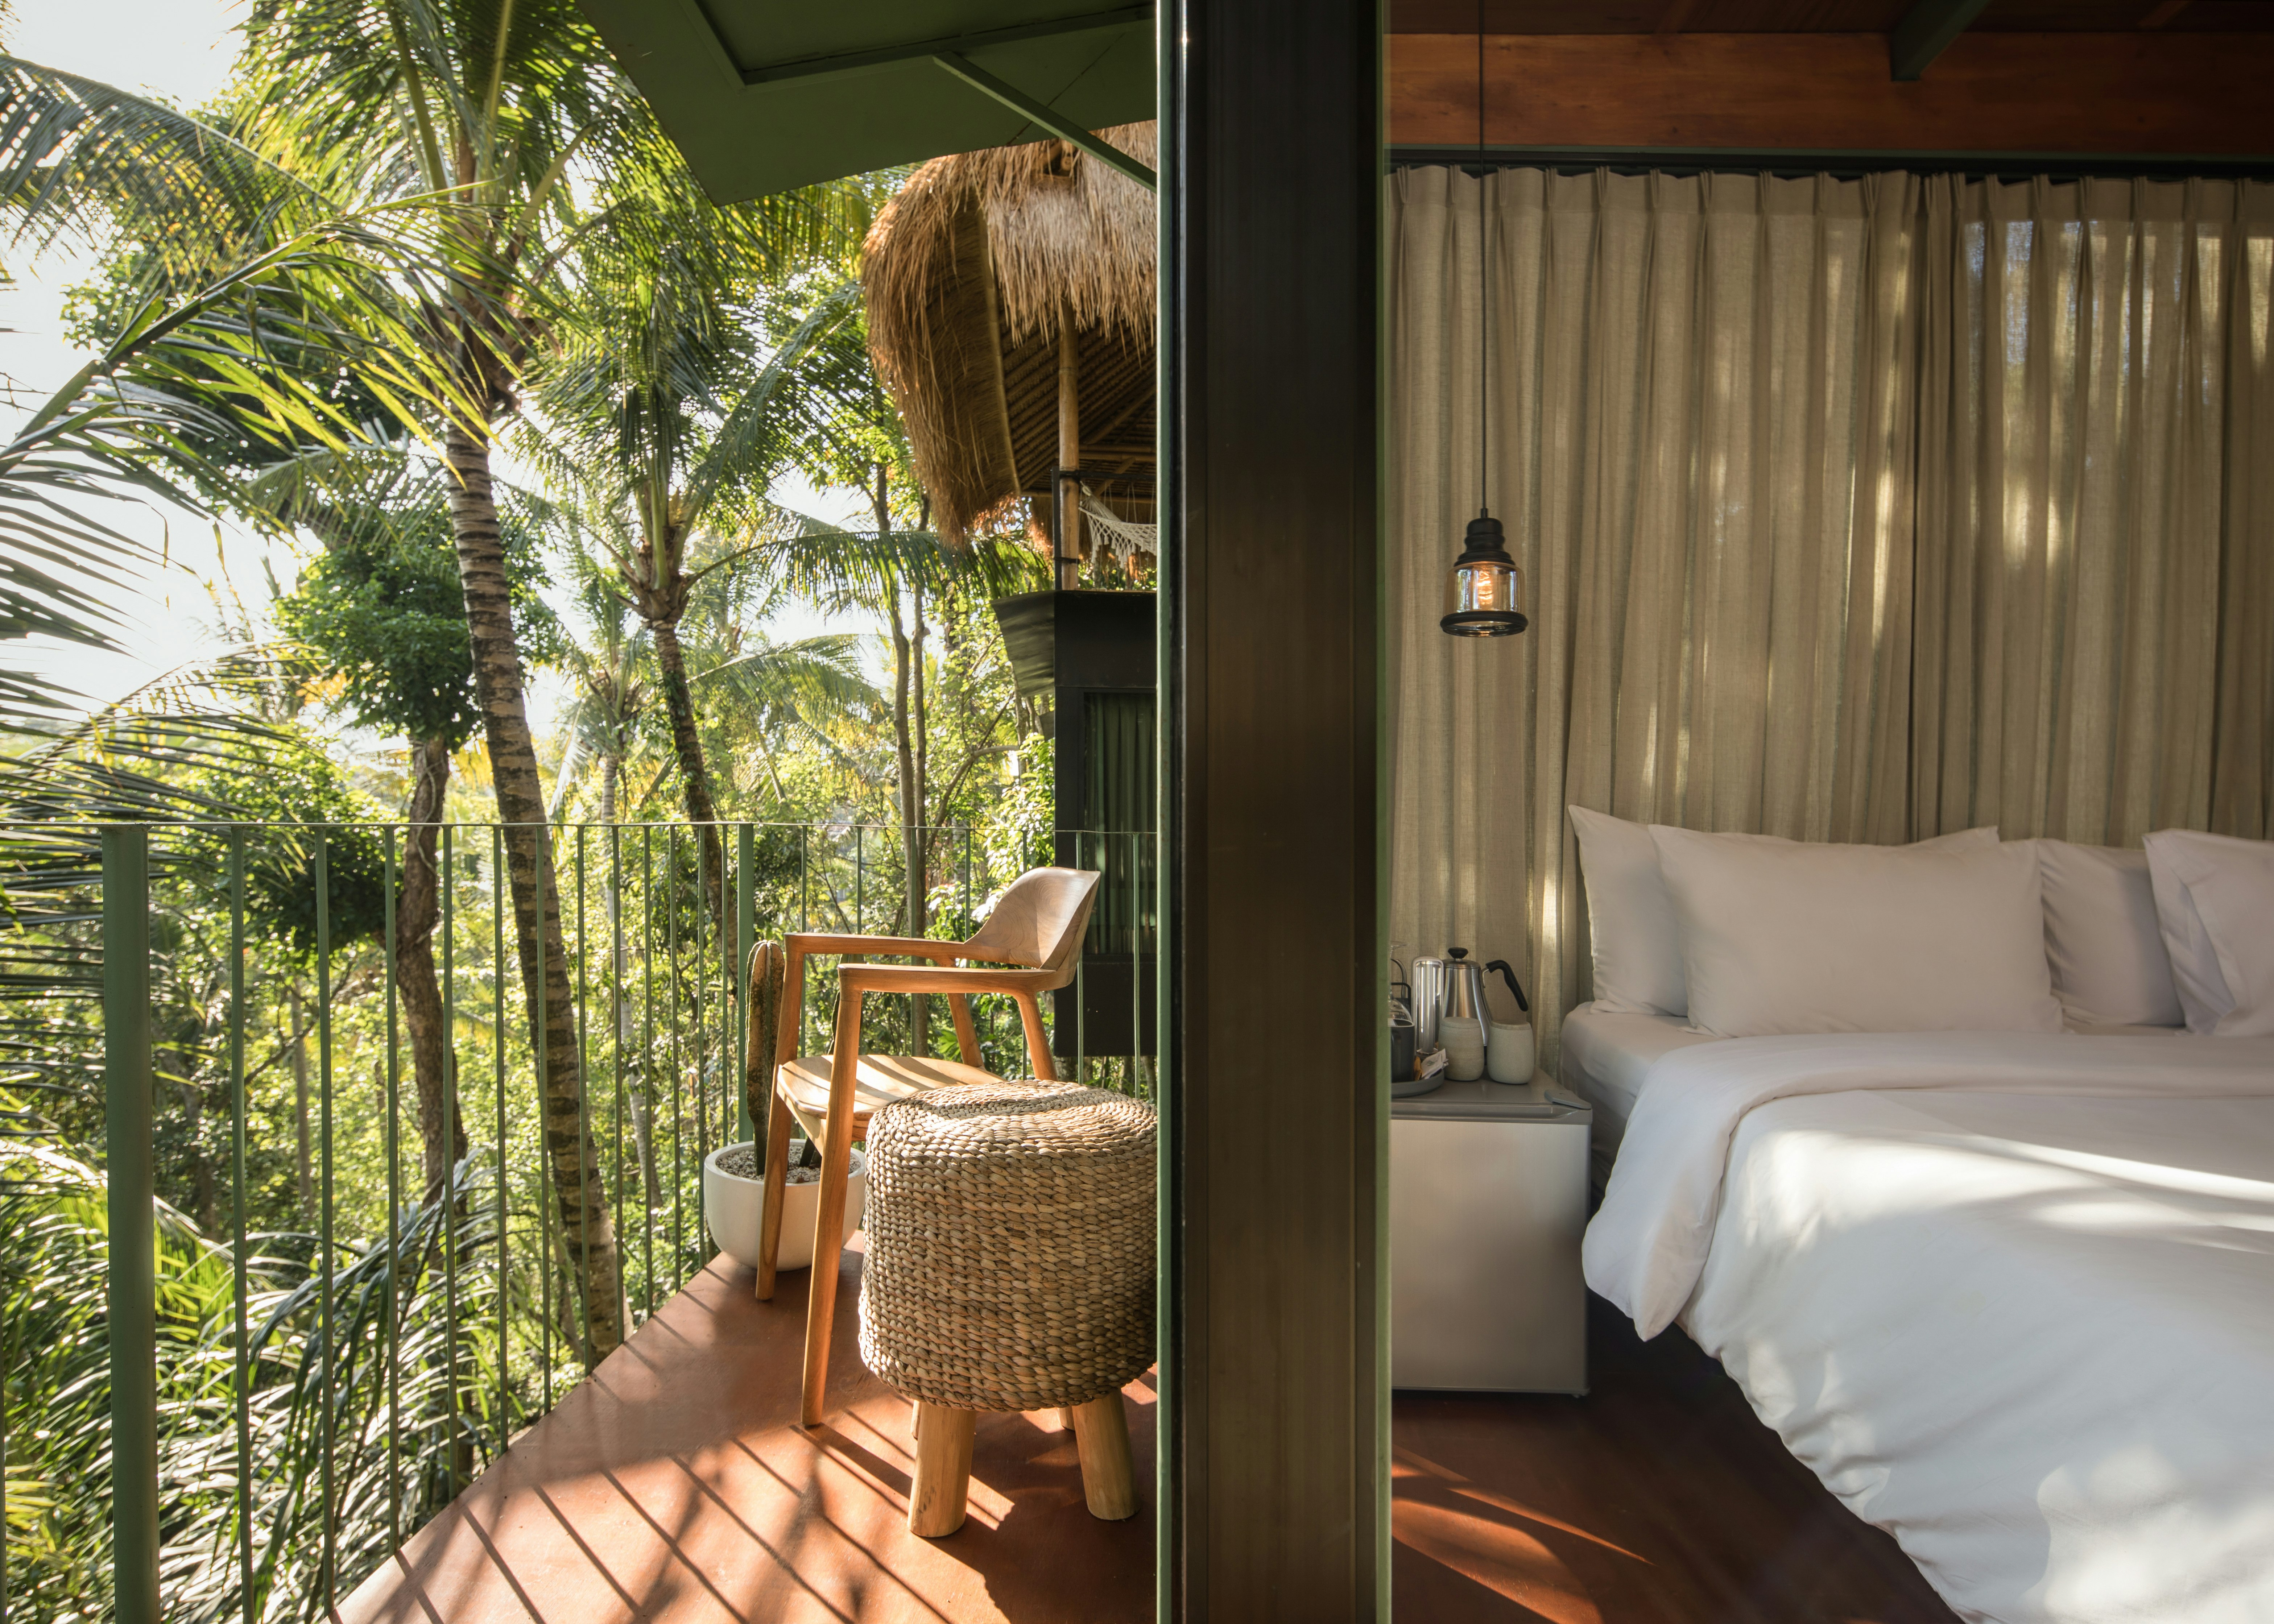 Balcony shot of a treetop lodge in a Balinese jungle